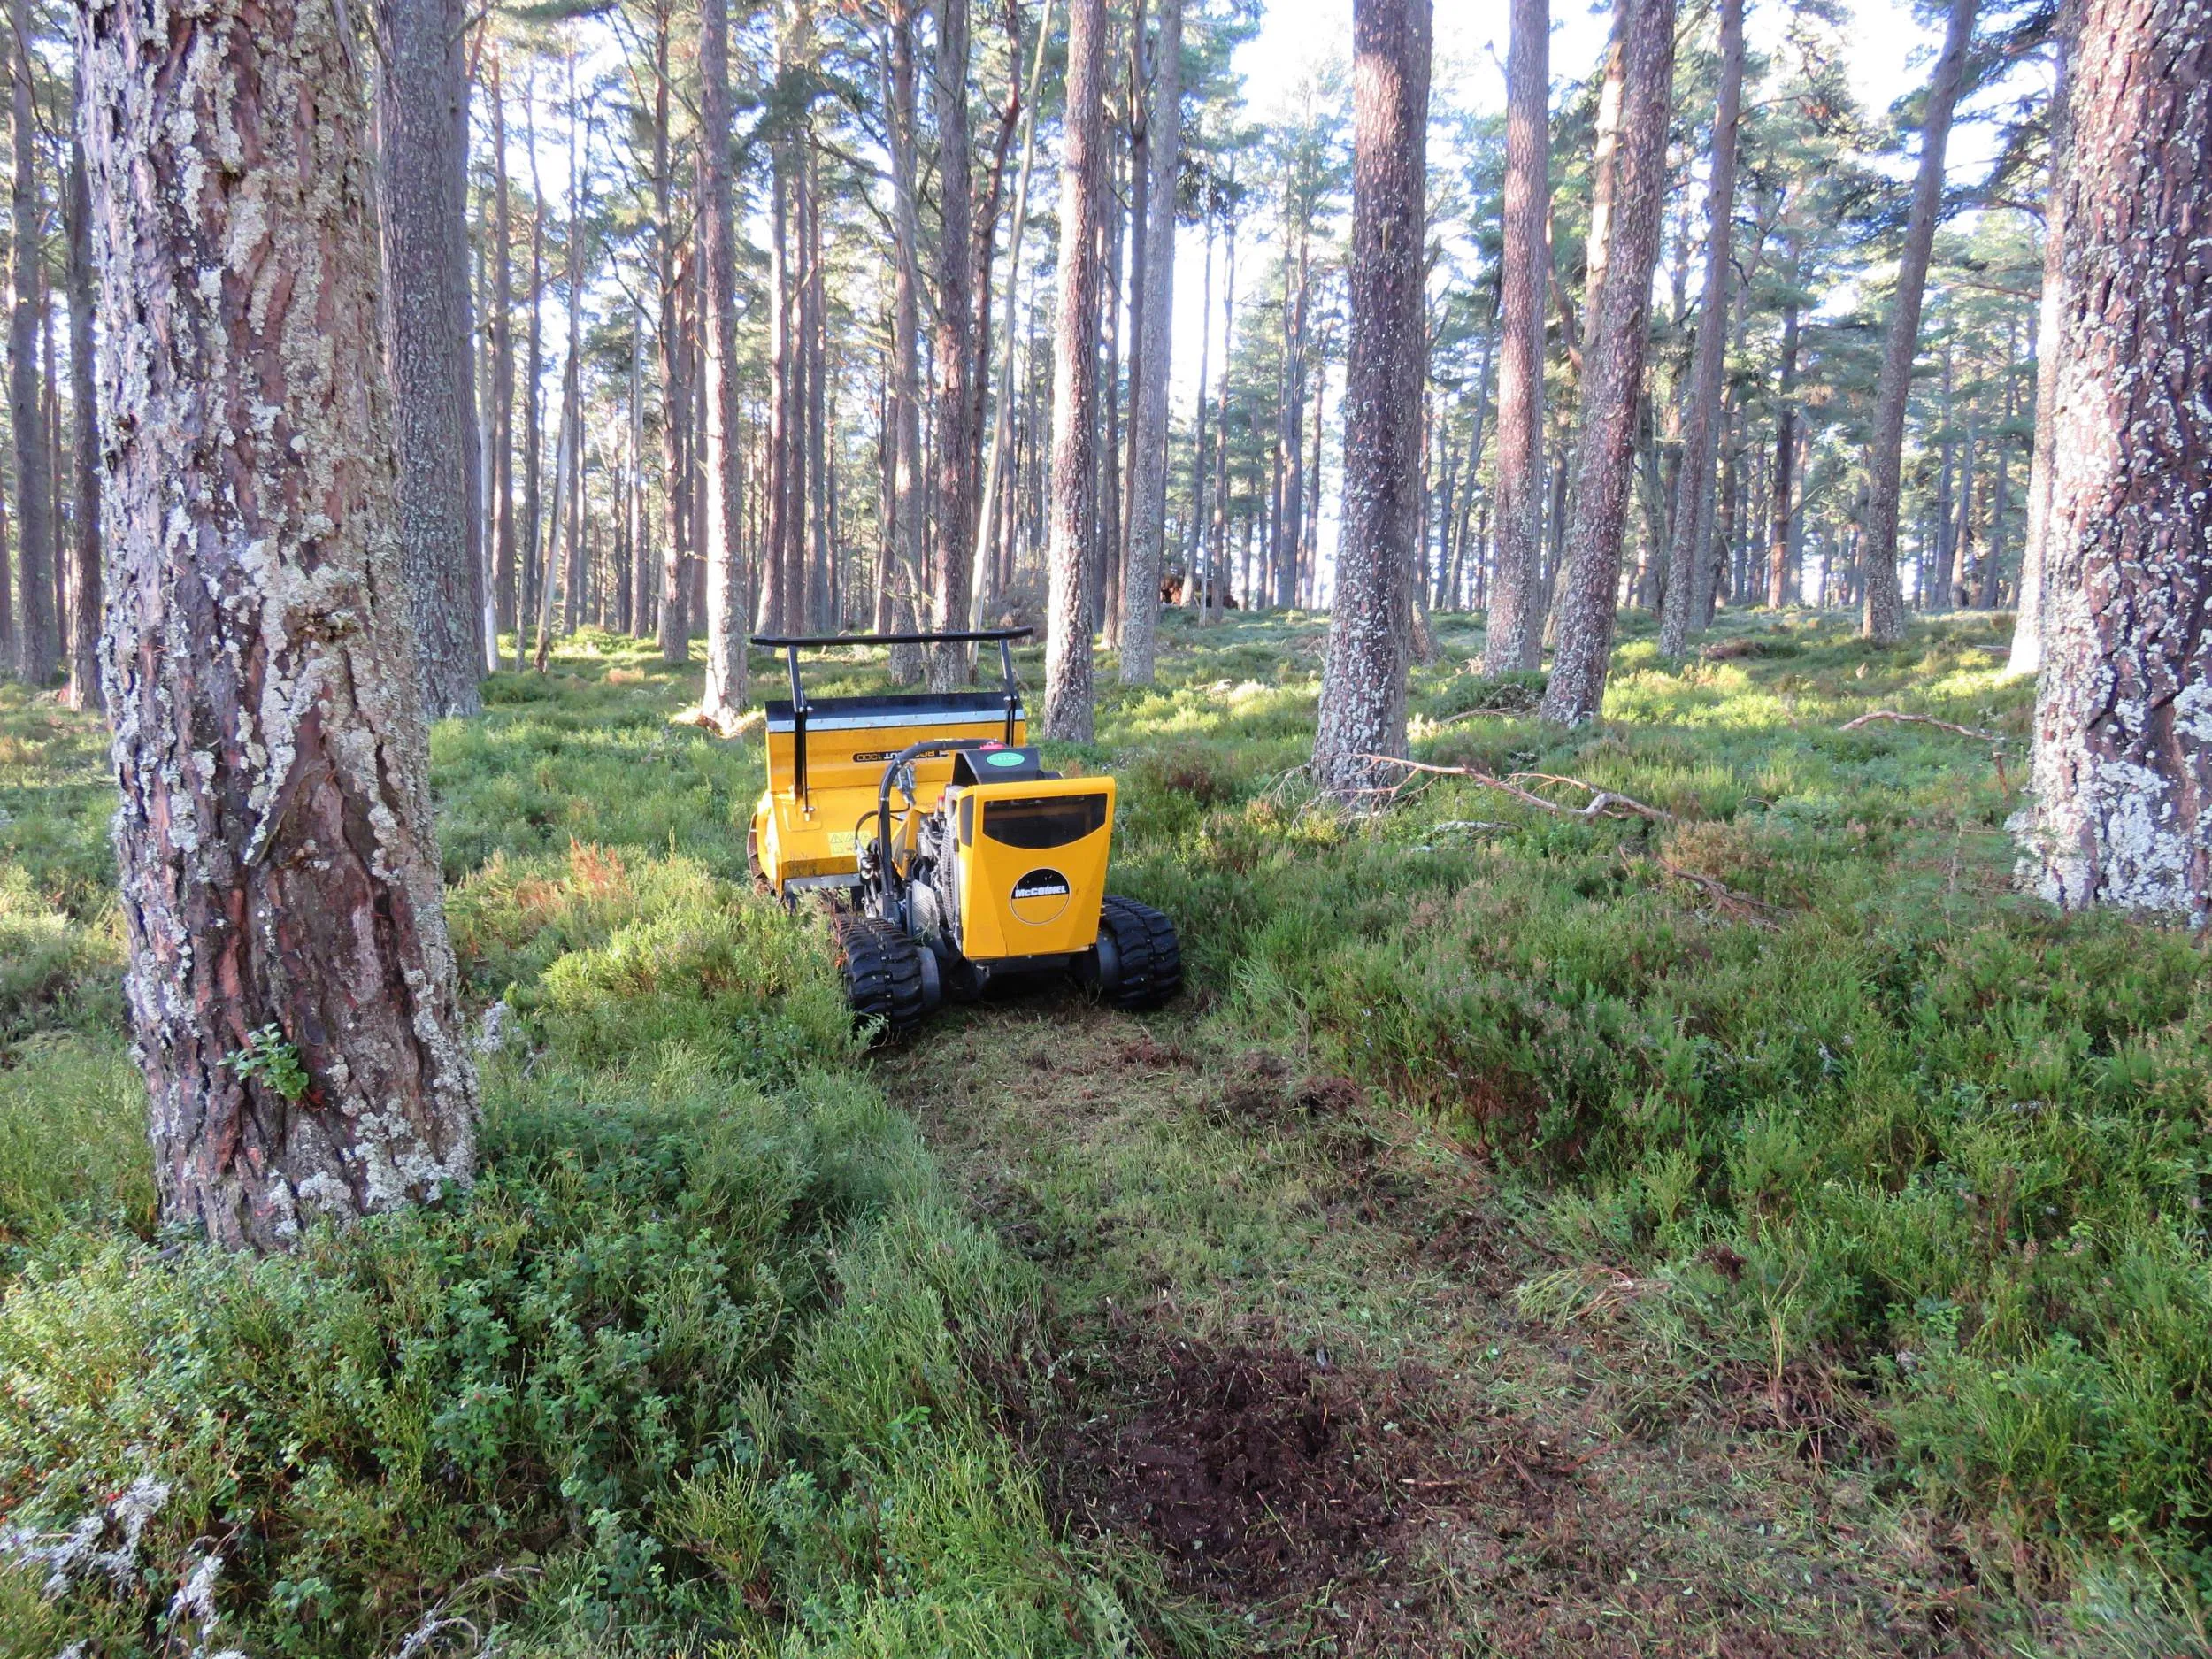 A large yellow vehicle cutting a path through undergrowth in a forest